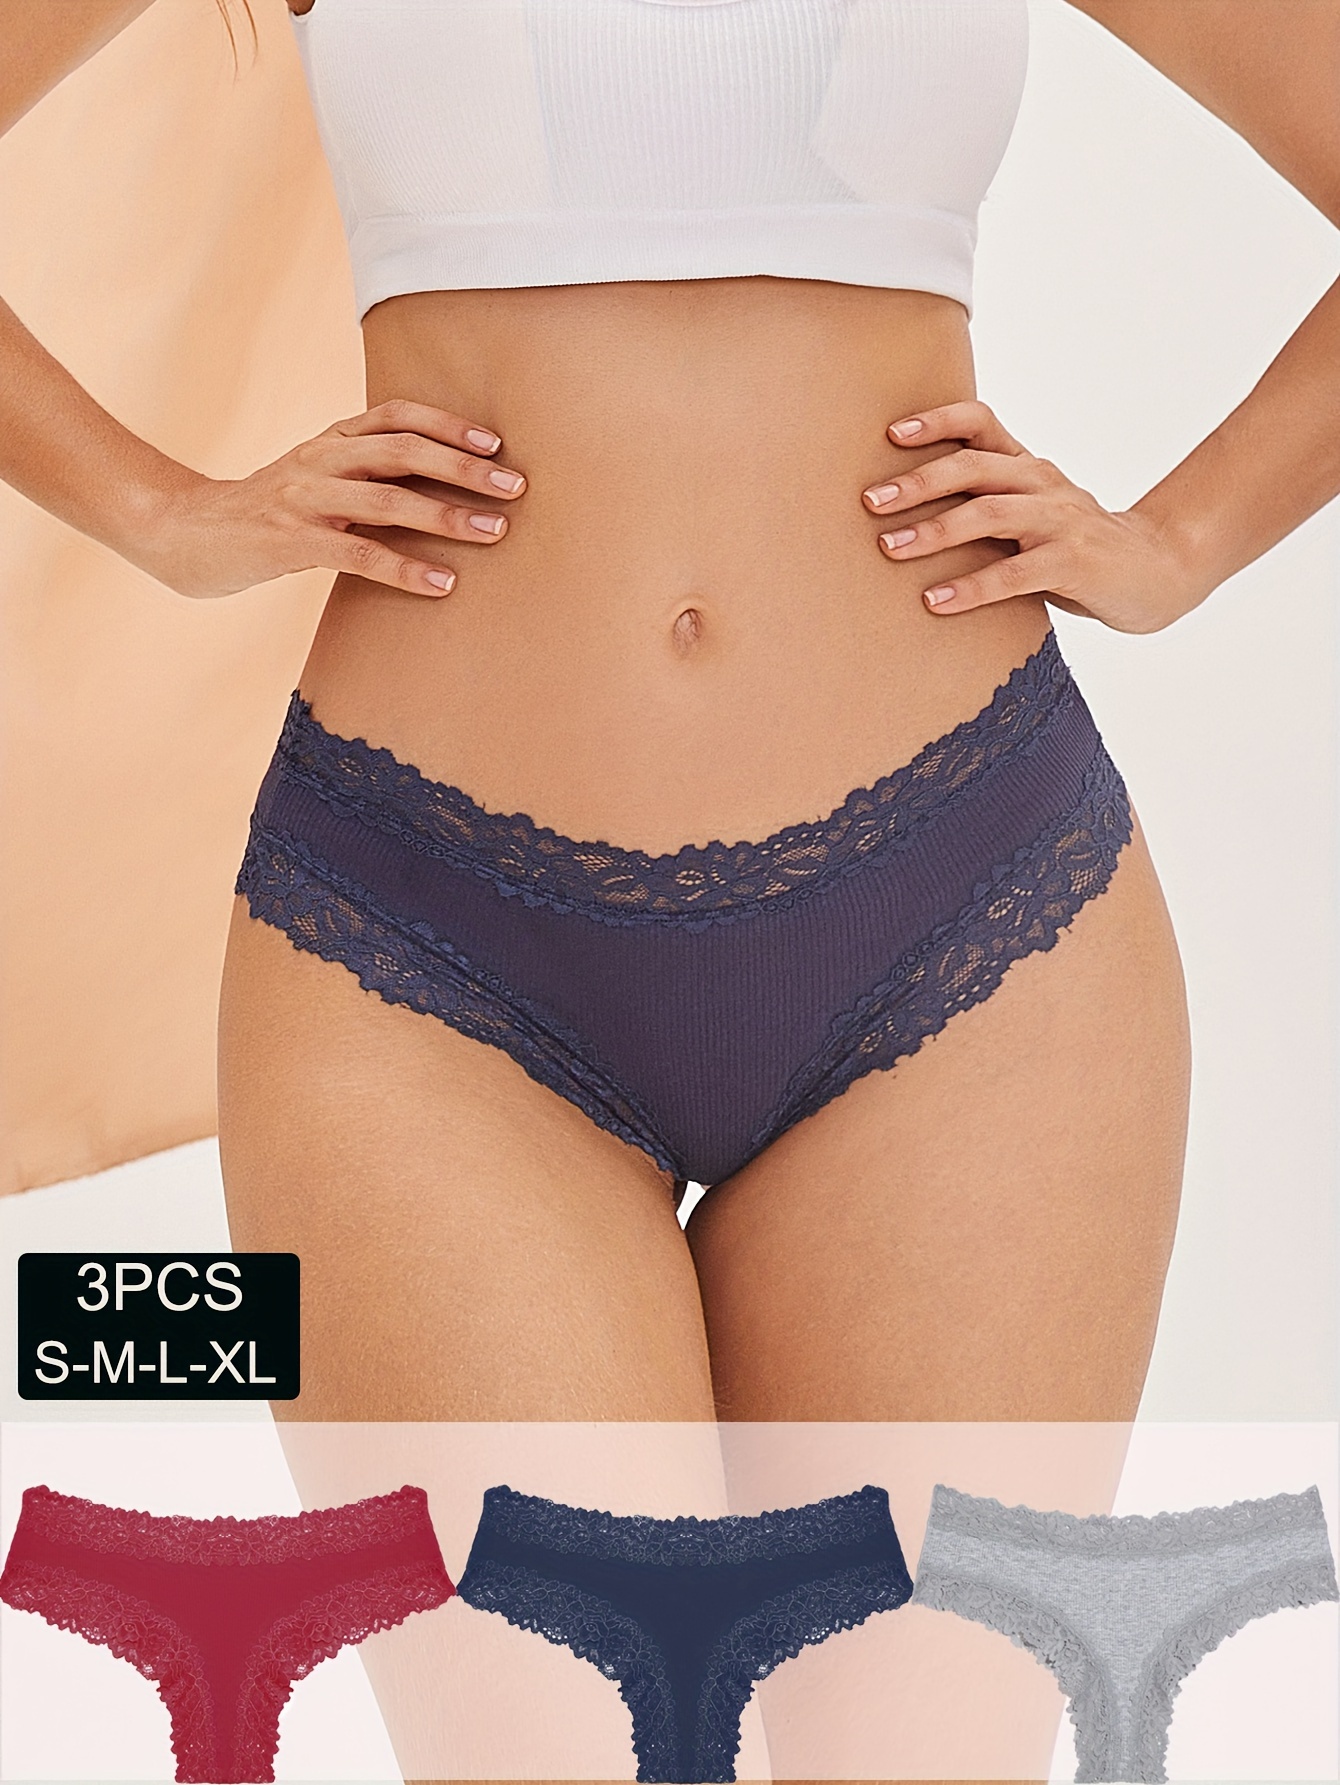 3pcs Lace Stitching Thongs, Soft & Comfy Ribbed Intimates Panties, Women's  Lingerie & Underwear